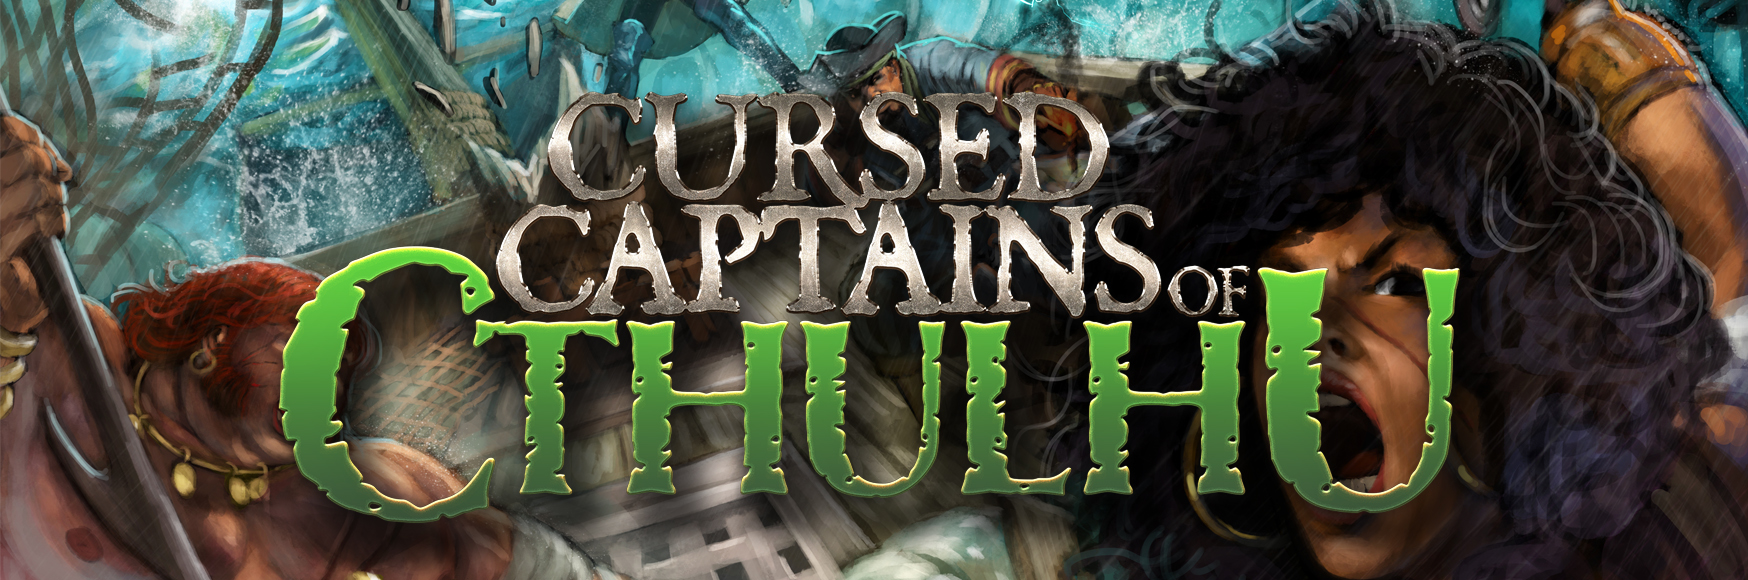 Cursed Captains of Cthulhu RPG Quickstart